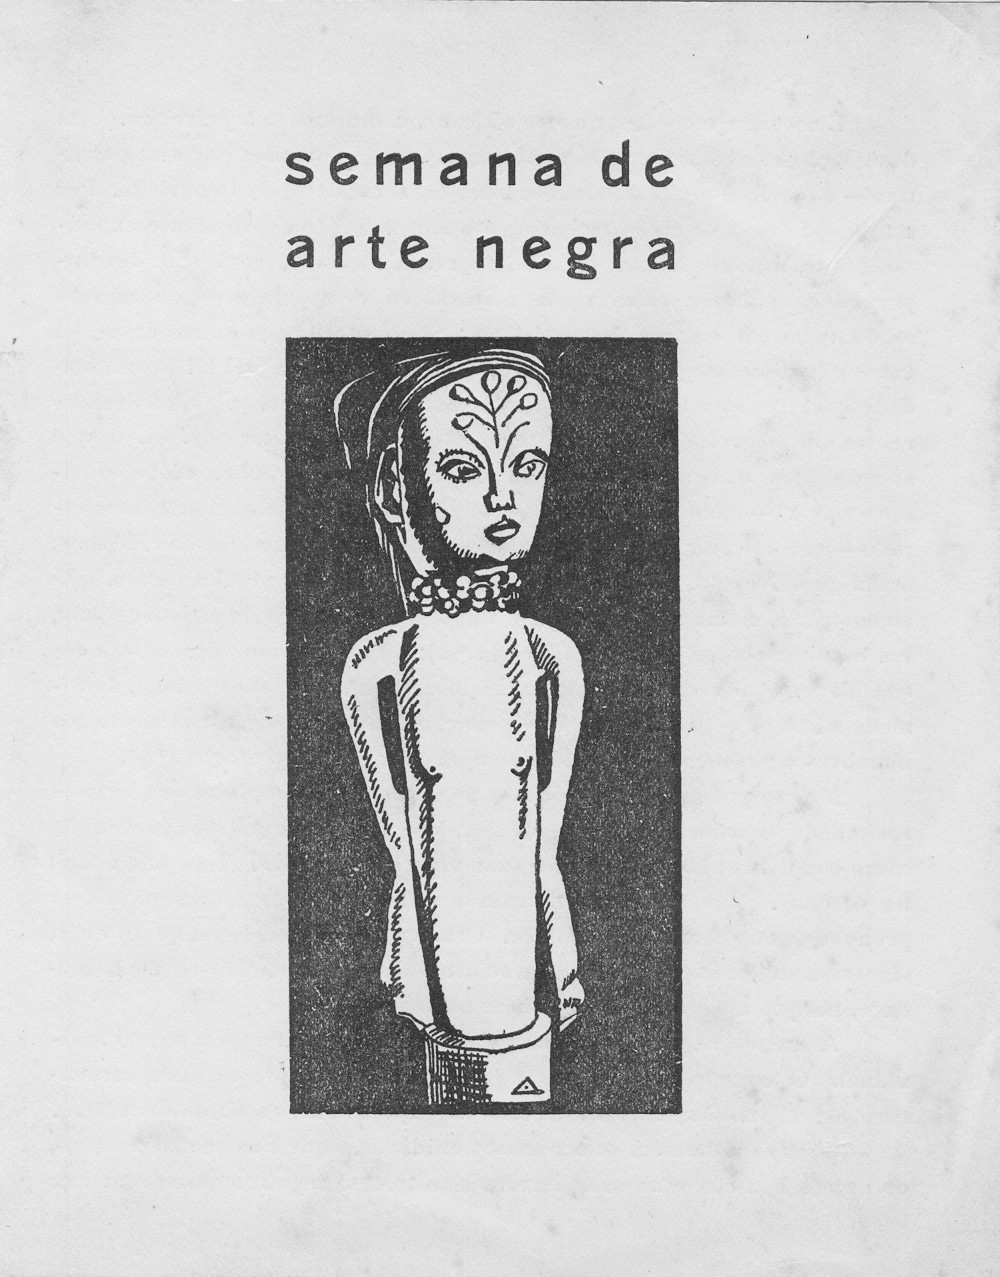  Cover of the booklet of the Black Art Week exhibiton, 1946. 